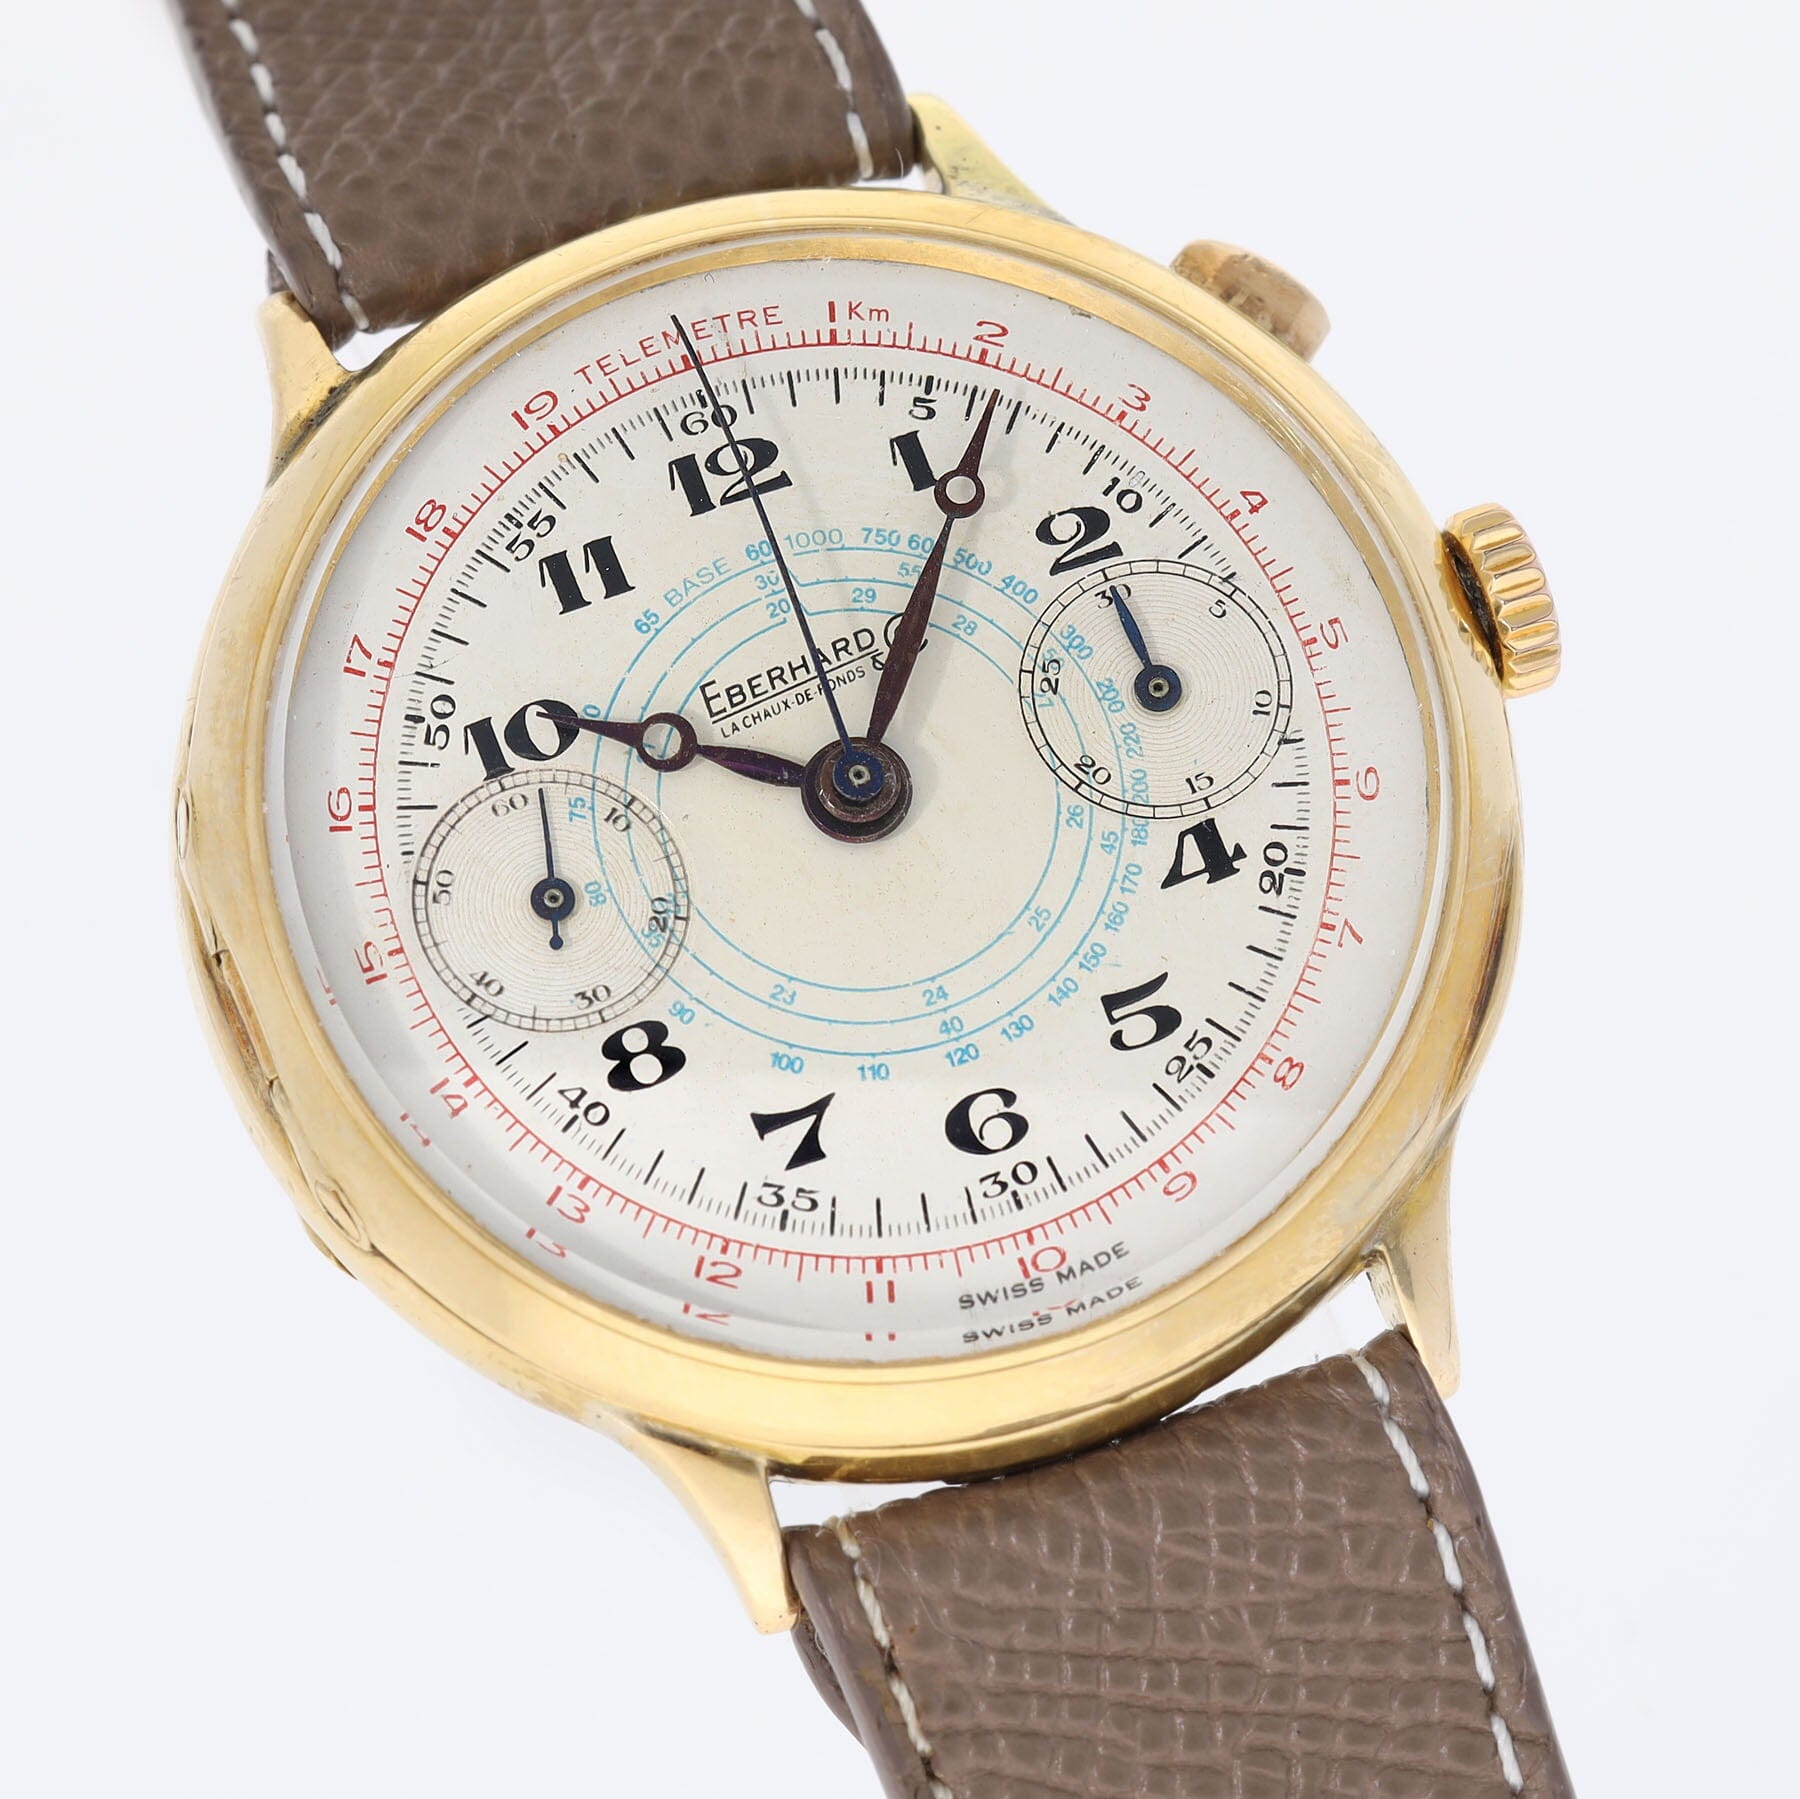 Eberhard & Co Monopusher Pre Extra Fort Chronograph 18k Yellow Gold